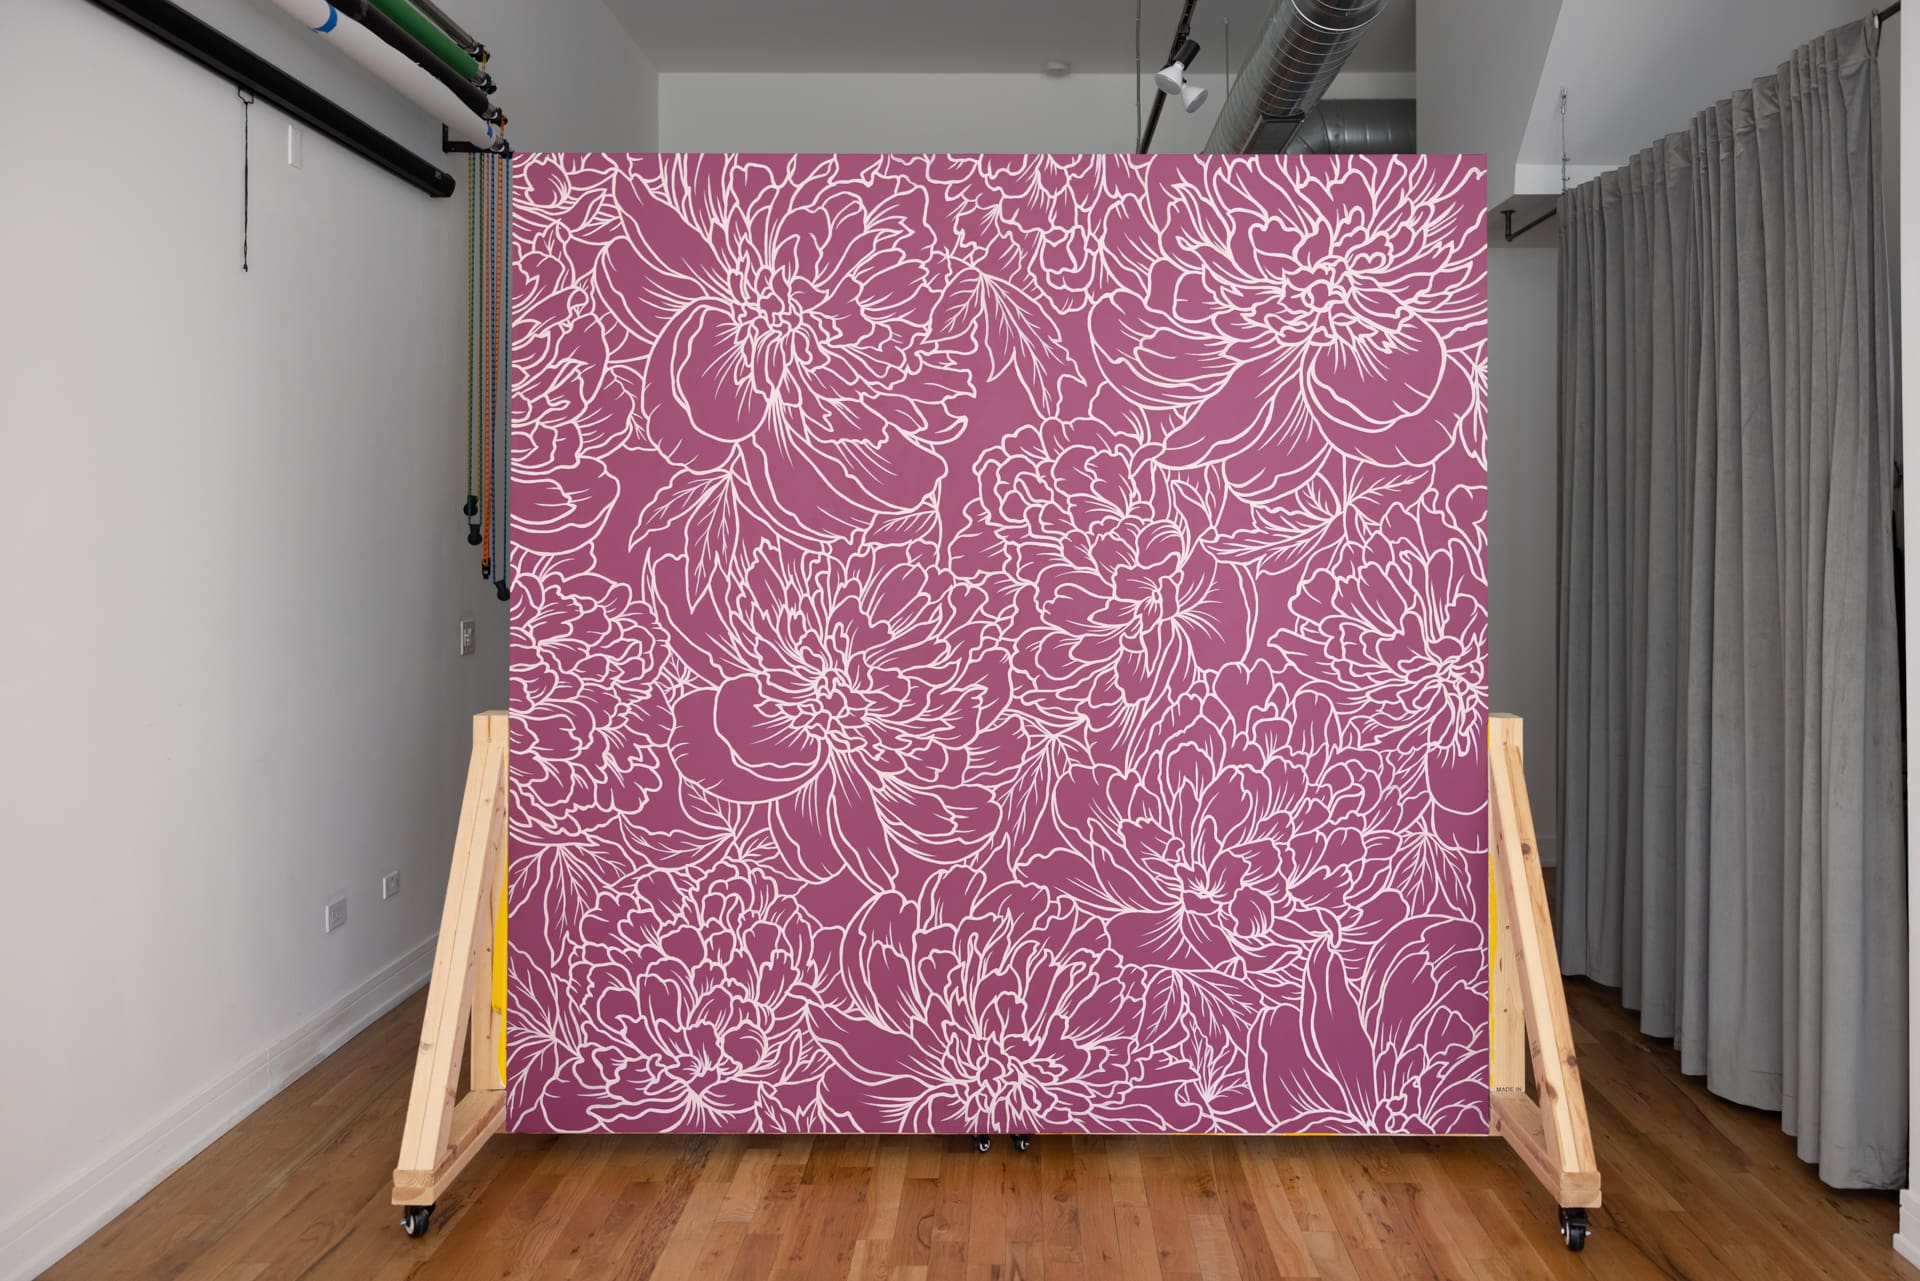 Mobile wall with custom floral mural in Raspberry Crush inside natural light photography studio P&M Studio Chicago